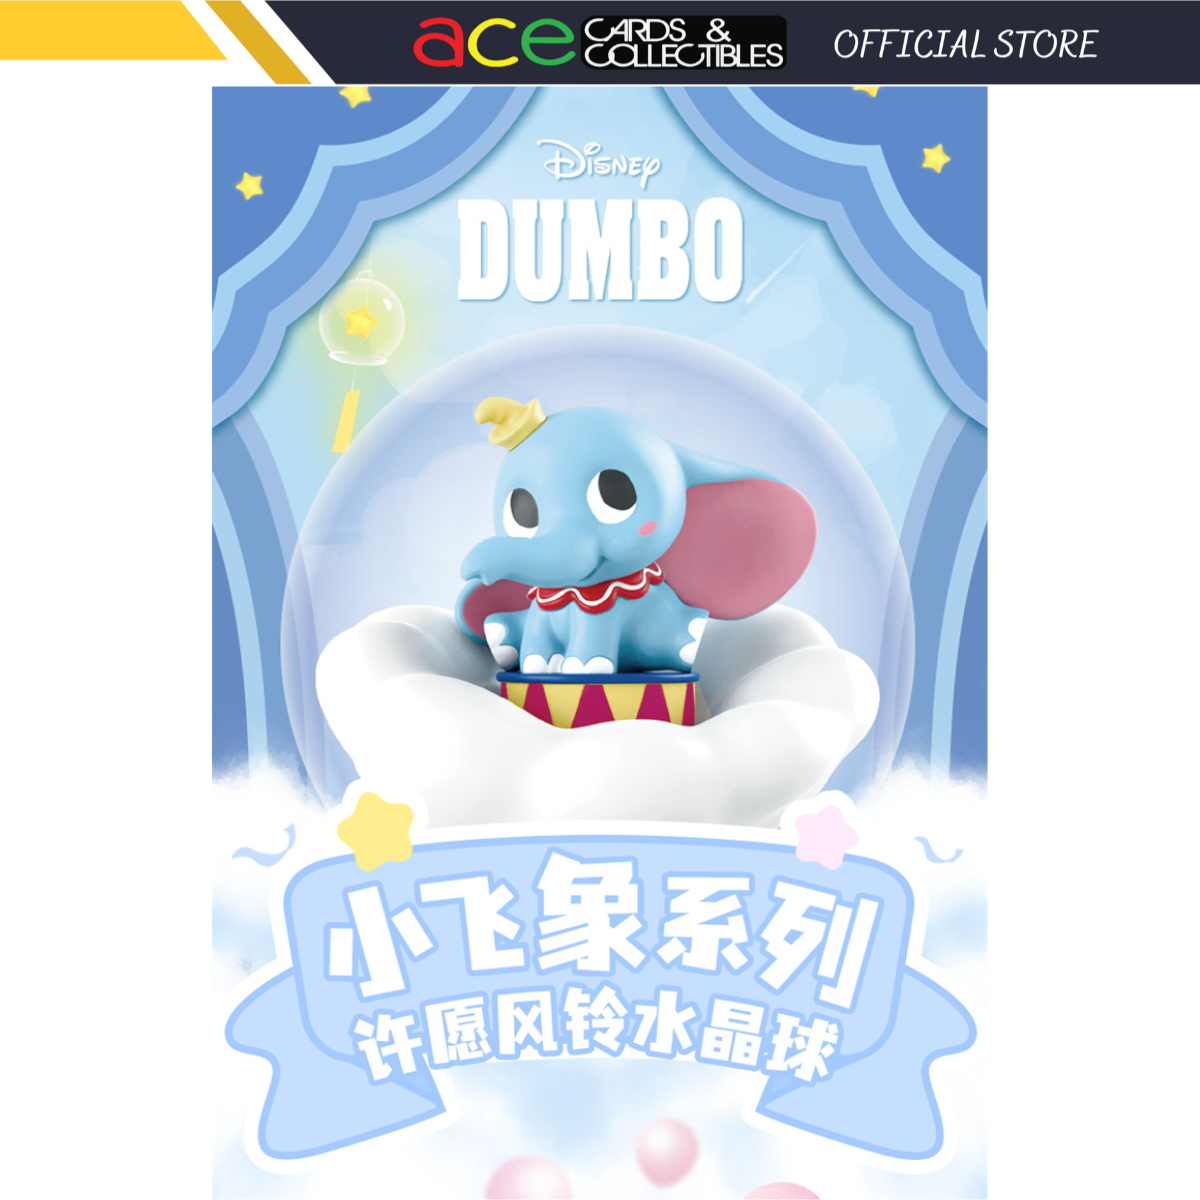 Lioh Toy Disney Dumbo Wishing Wind Chime Crystal Ball Series-Single Box (Random)-Lioh Toy-Ace Cards & Collectibles